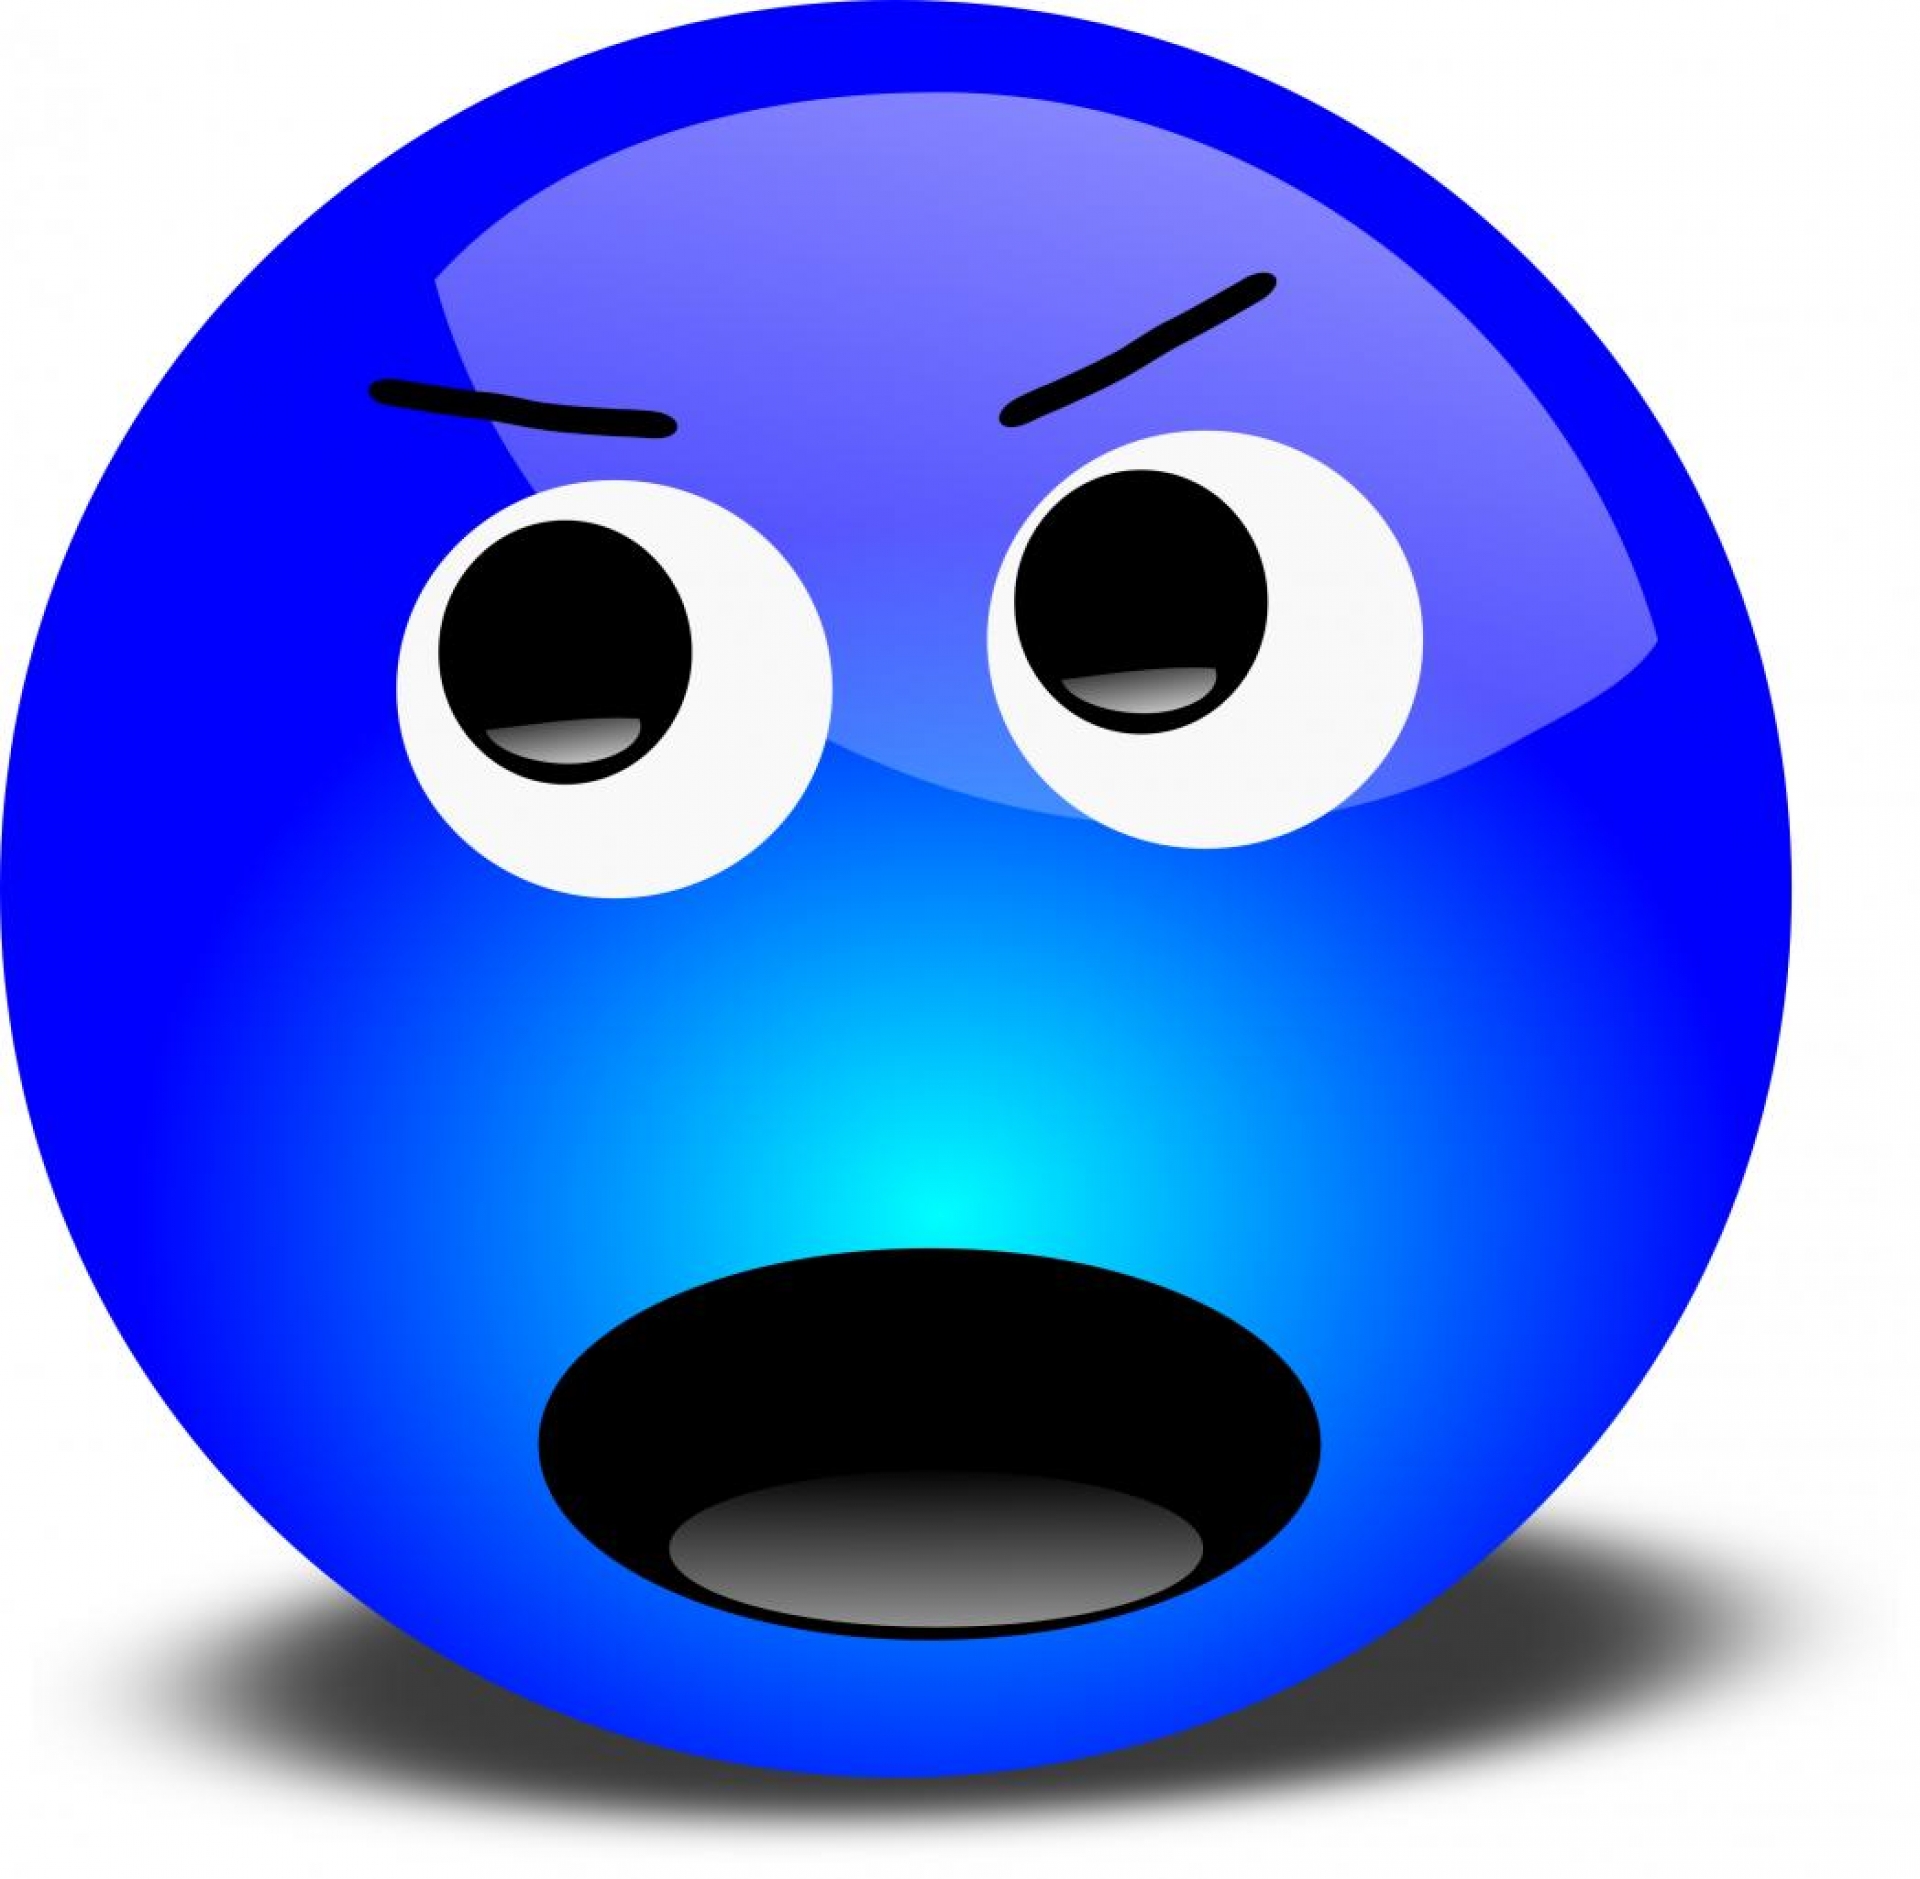 Angry Face Cartoon Picture - ClipArt Best - ClipArt Best